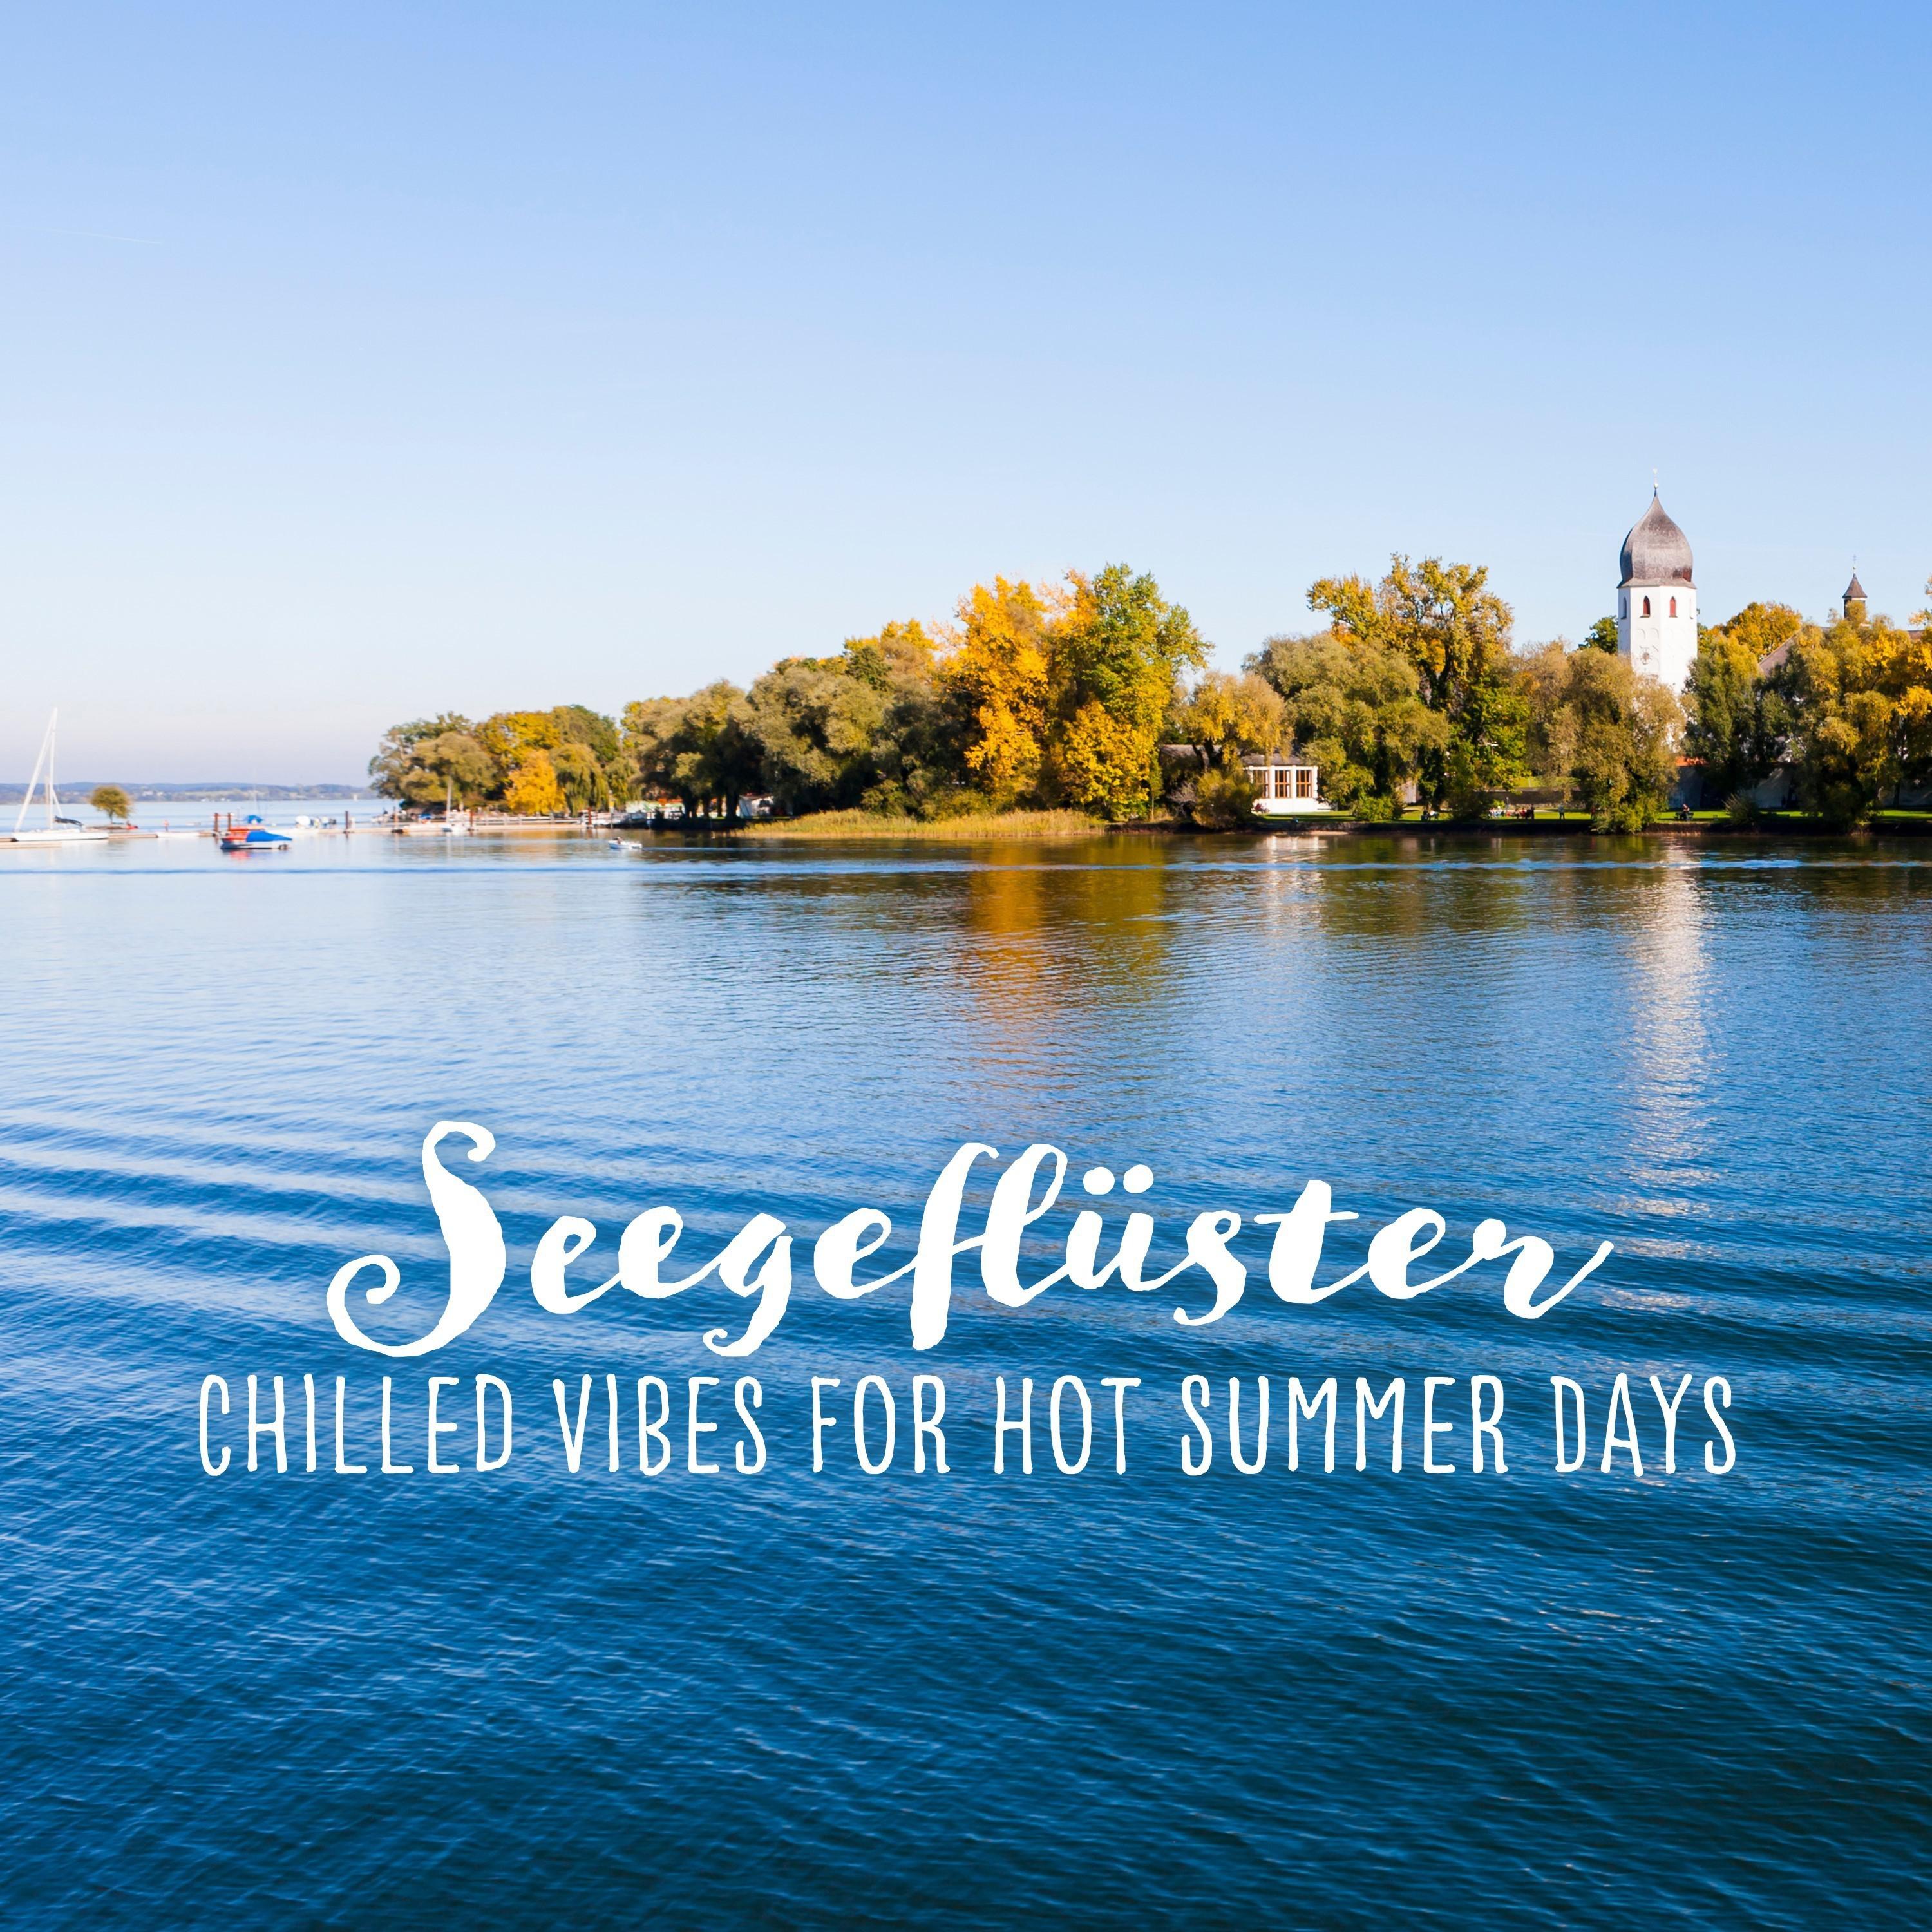 Seegeflü ster: Chilled Vibes for Hot Summer Days